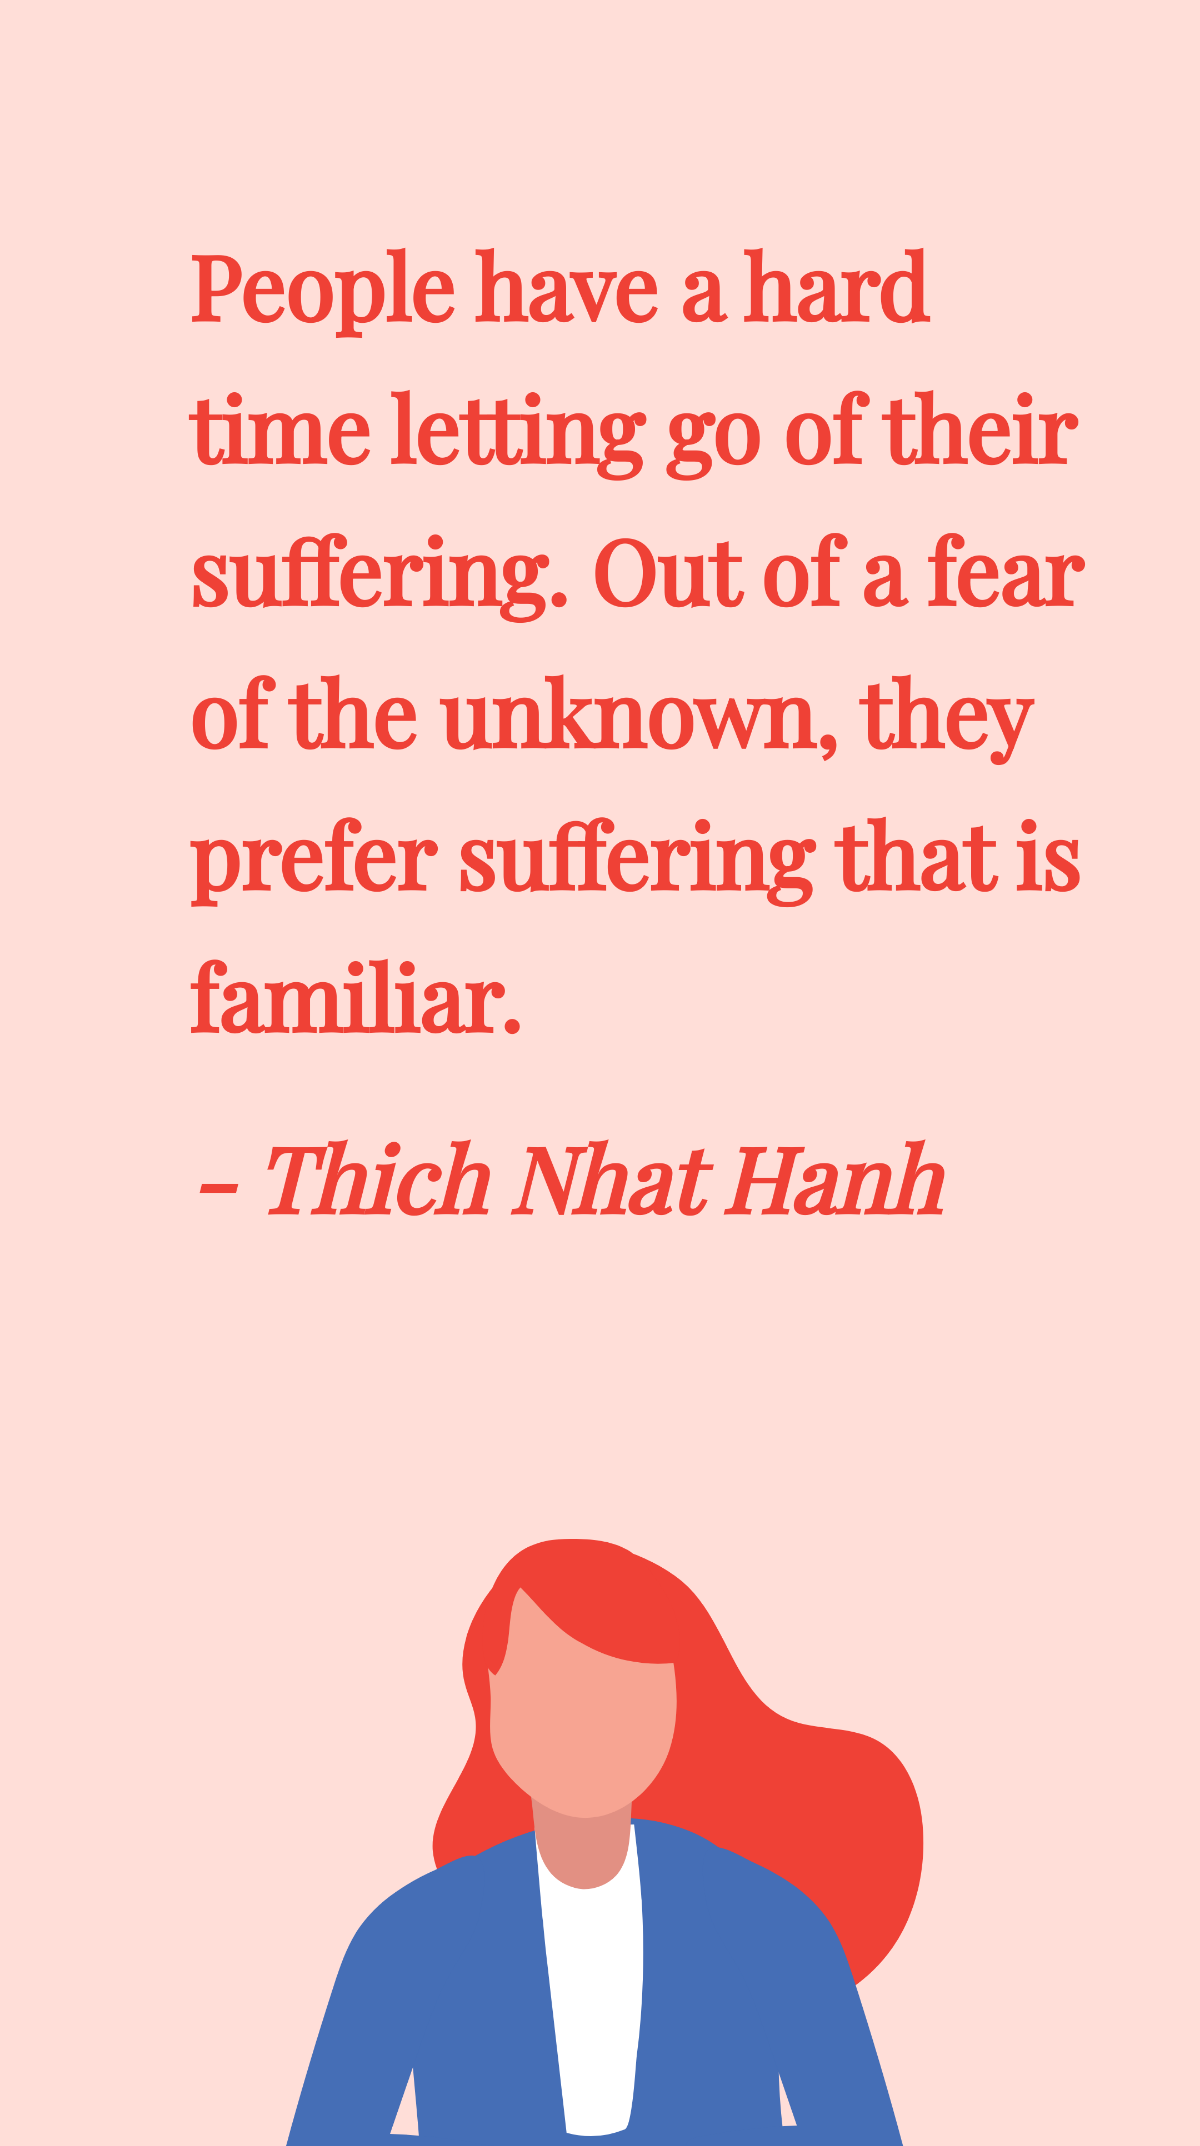 Thich Nhat Hanh - People have a hard time letting go of their suffering. Out of a fear of the unknown, they prefer suffering that is familiar.